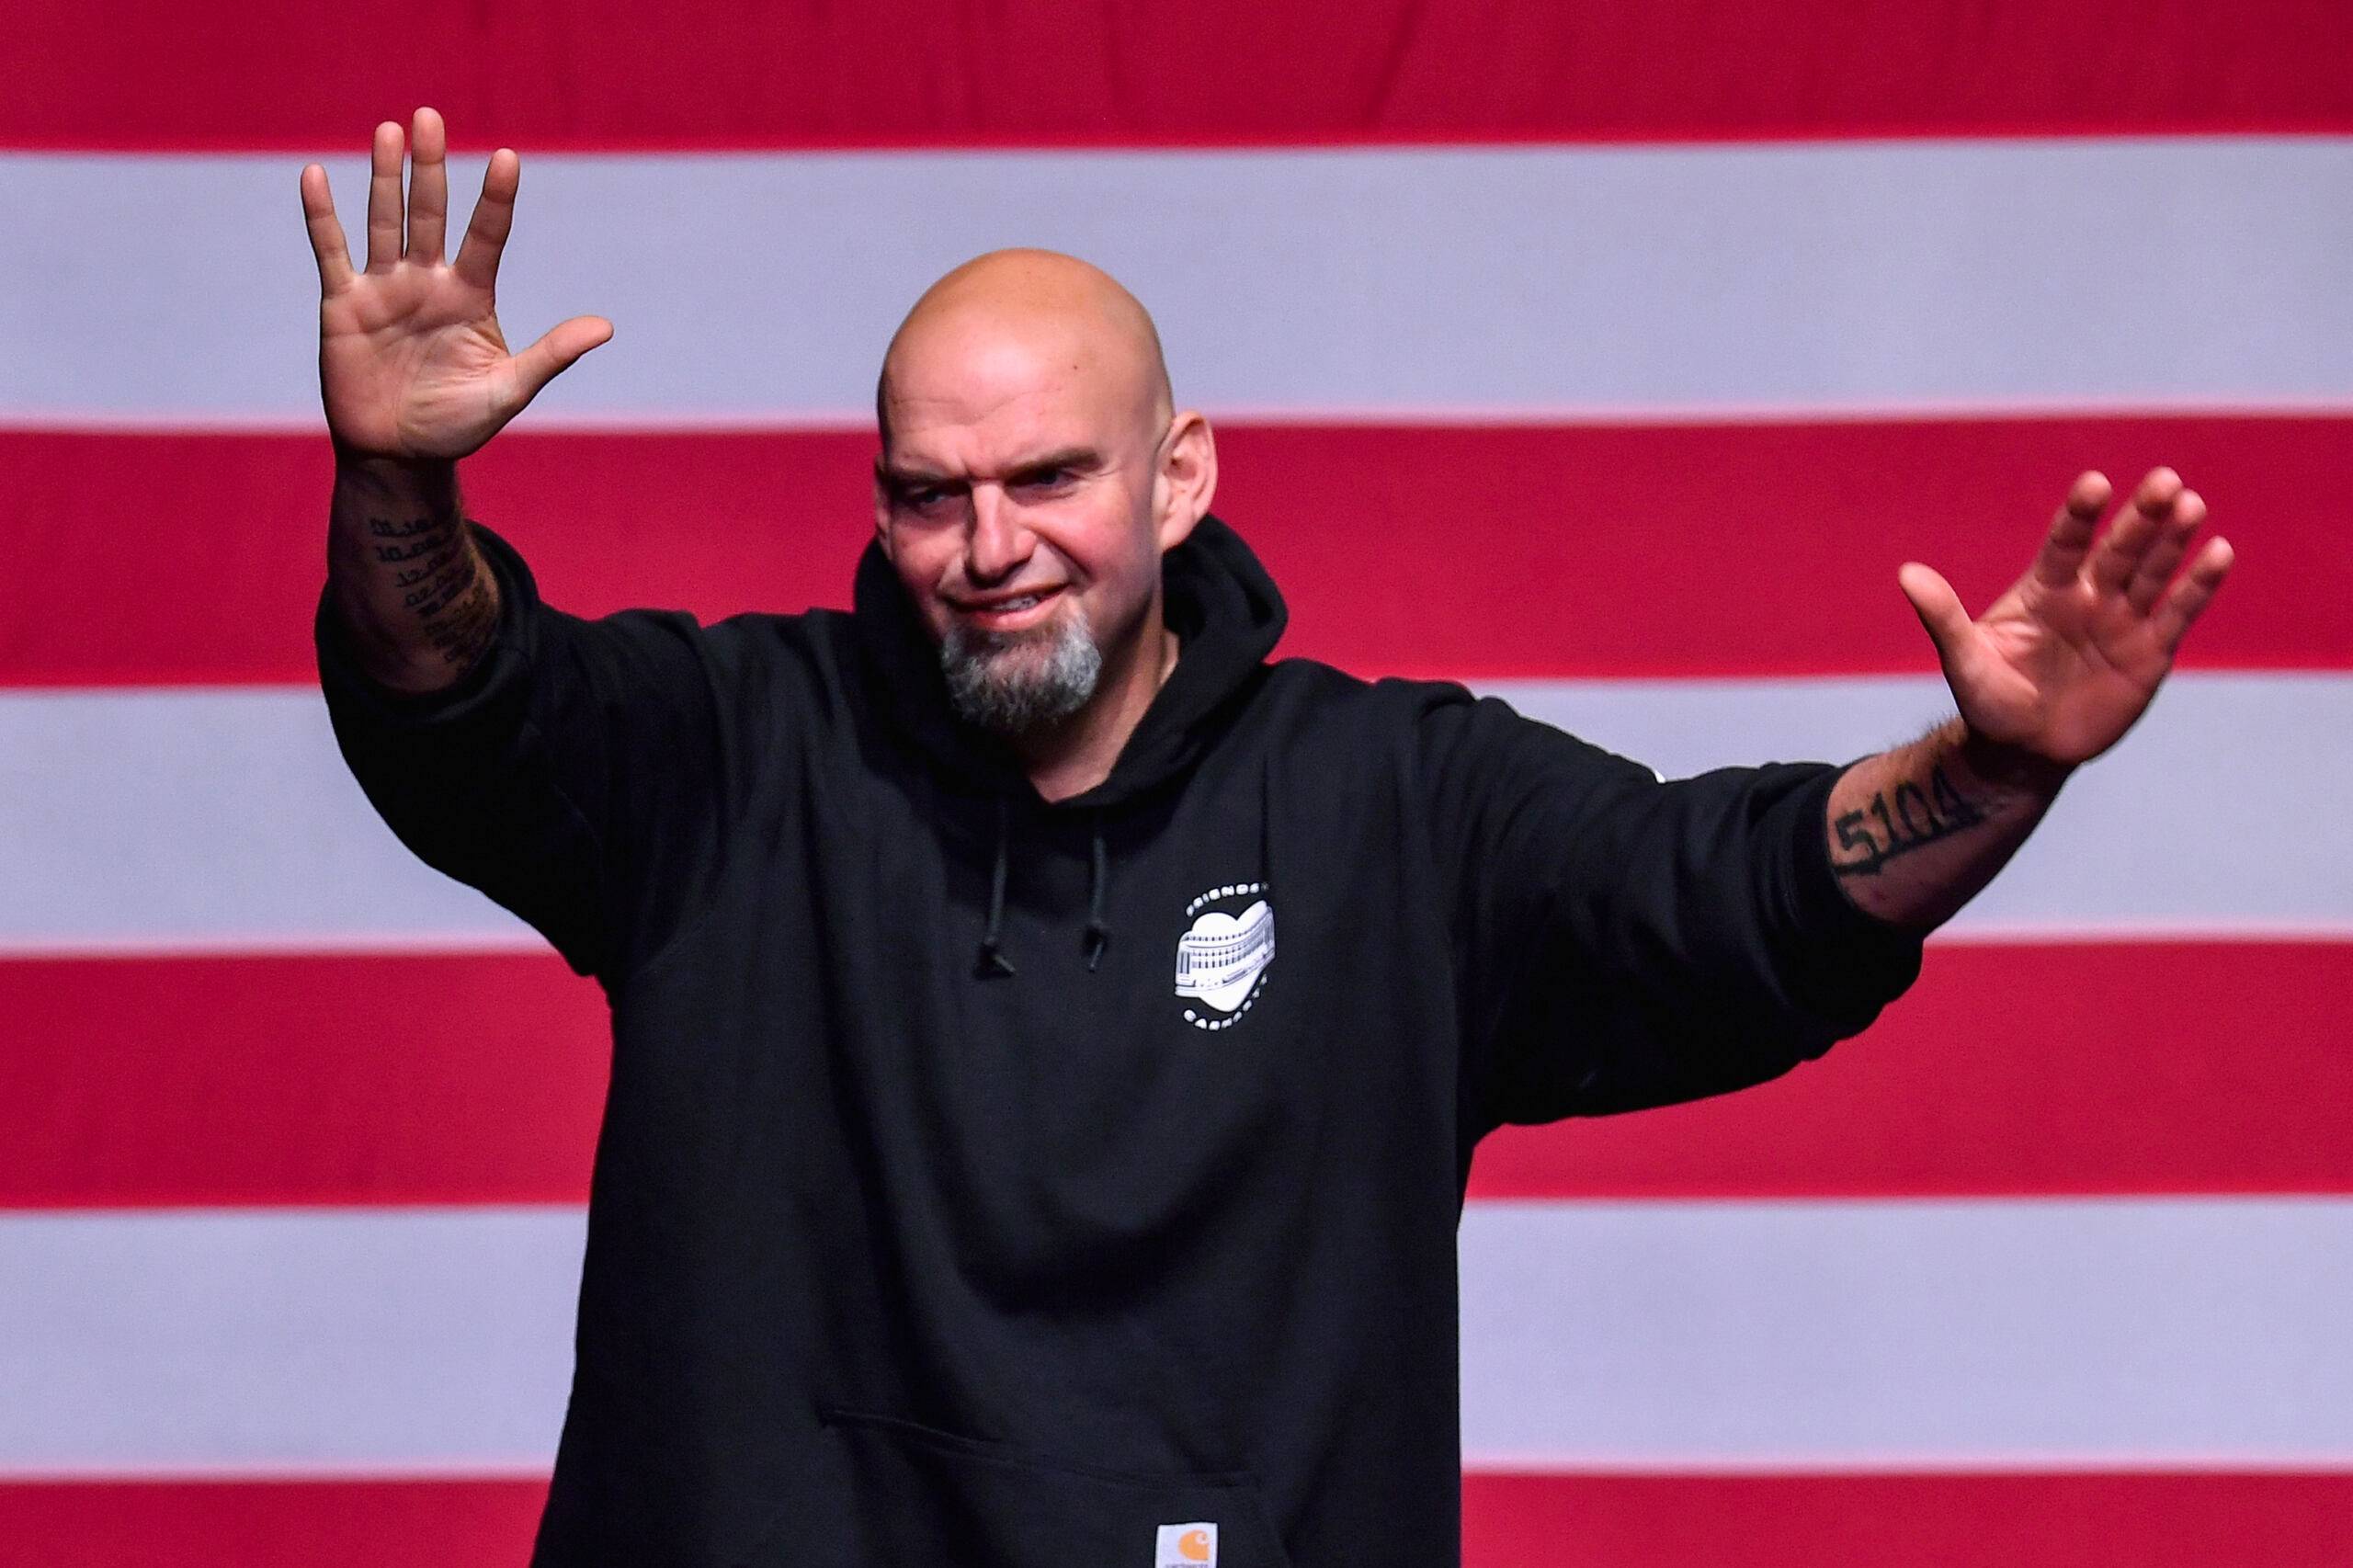 Pennsylvania Democratic Senatorial candidate John Fetterman waves onstage at a watch party during the midterm elections at Stage AE in Pittsburgh, Pennsylvania, on November 8, 2022. - President Joe Biden's party picked up a first seat in the upper chamber of Congress on Tuesday as Democrat John Fetterman defeated celebrity doctor Mehmet Oz in Pennsylvania, media projections showed. (Photo by ANGELA WEISS / AFP)